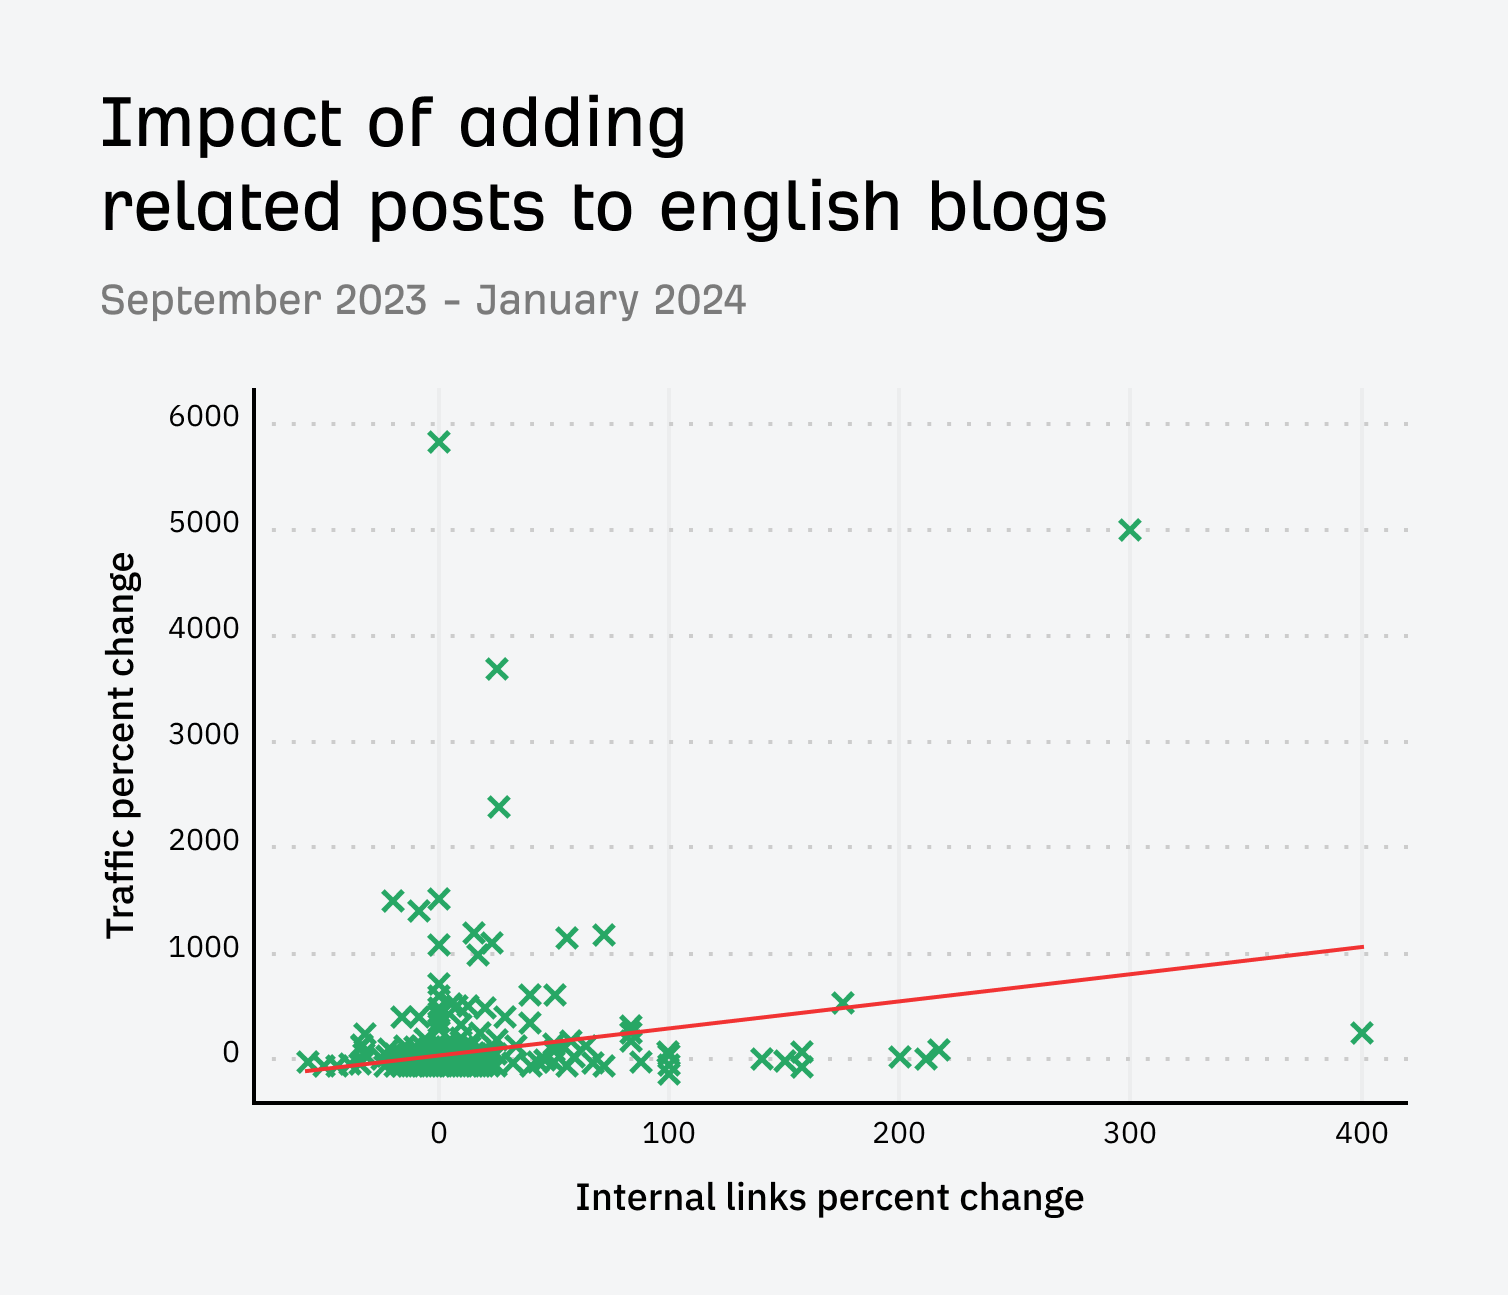 Impact of adding related posts to English blogs over a longer time period